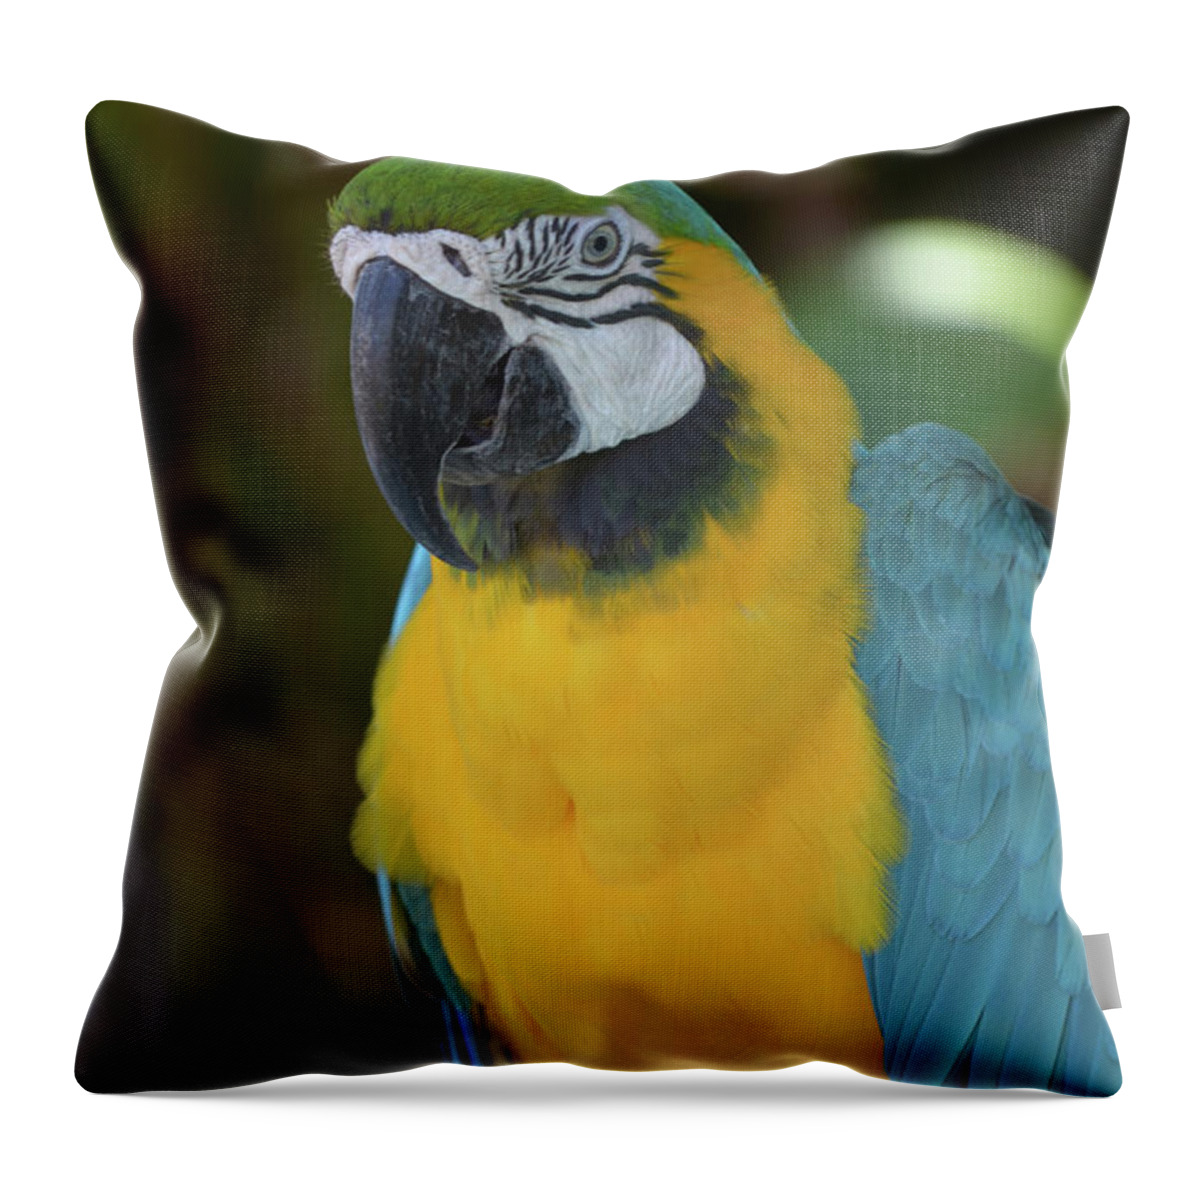 Blue And Gold Macaw Bird With His Beak Curved Throw Pillow For Sale By Dejavu Designs,10 Year Wedding Anniversary Gift